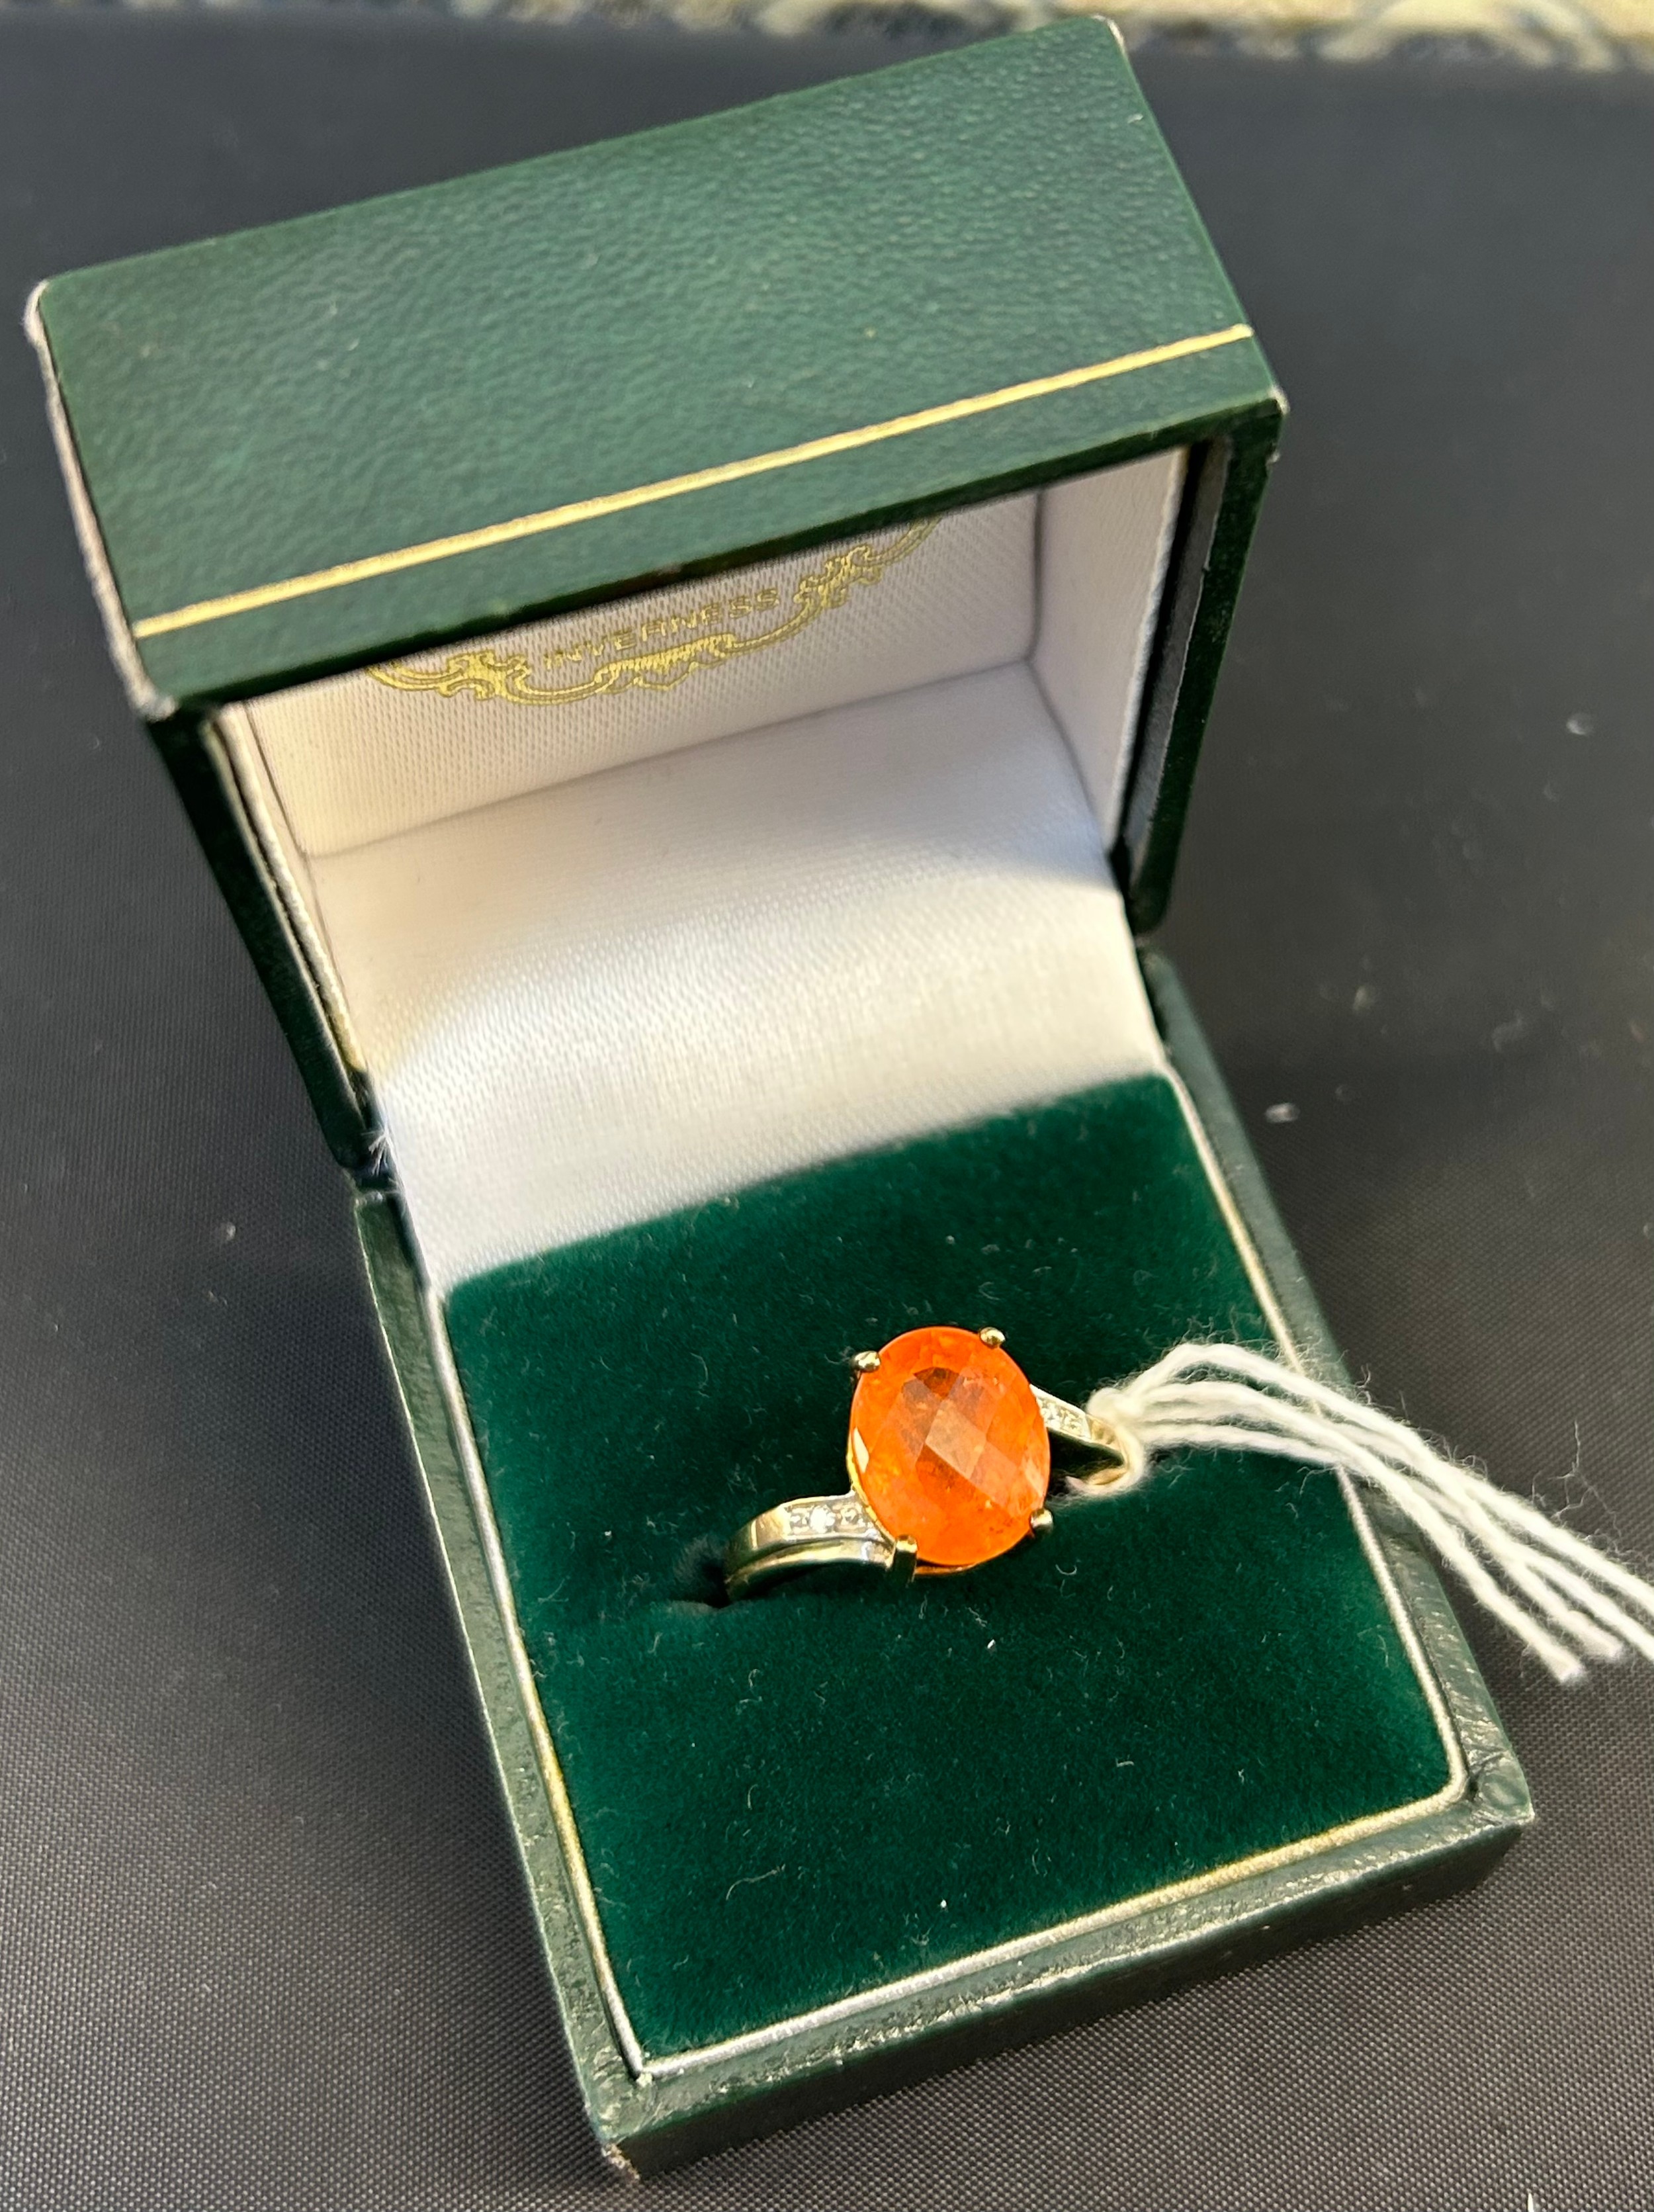 9ct yellow gold ladies ring set with orange gem stone off set by diamond shoulders. [Ring size N] [